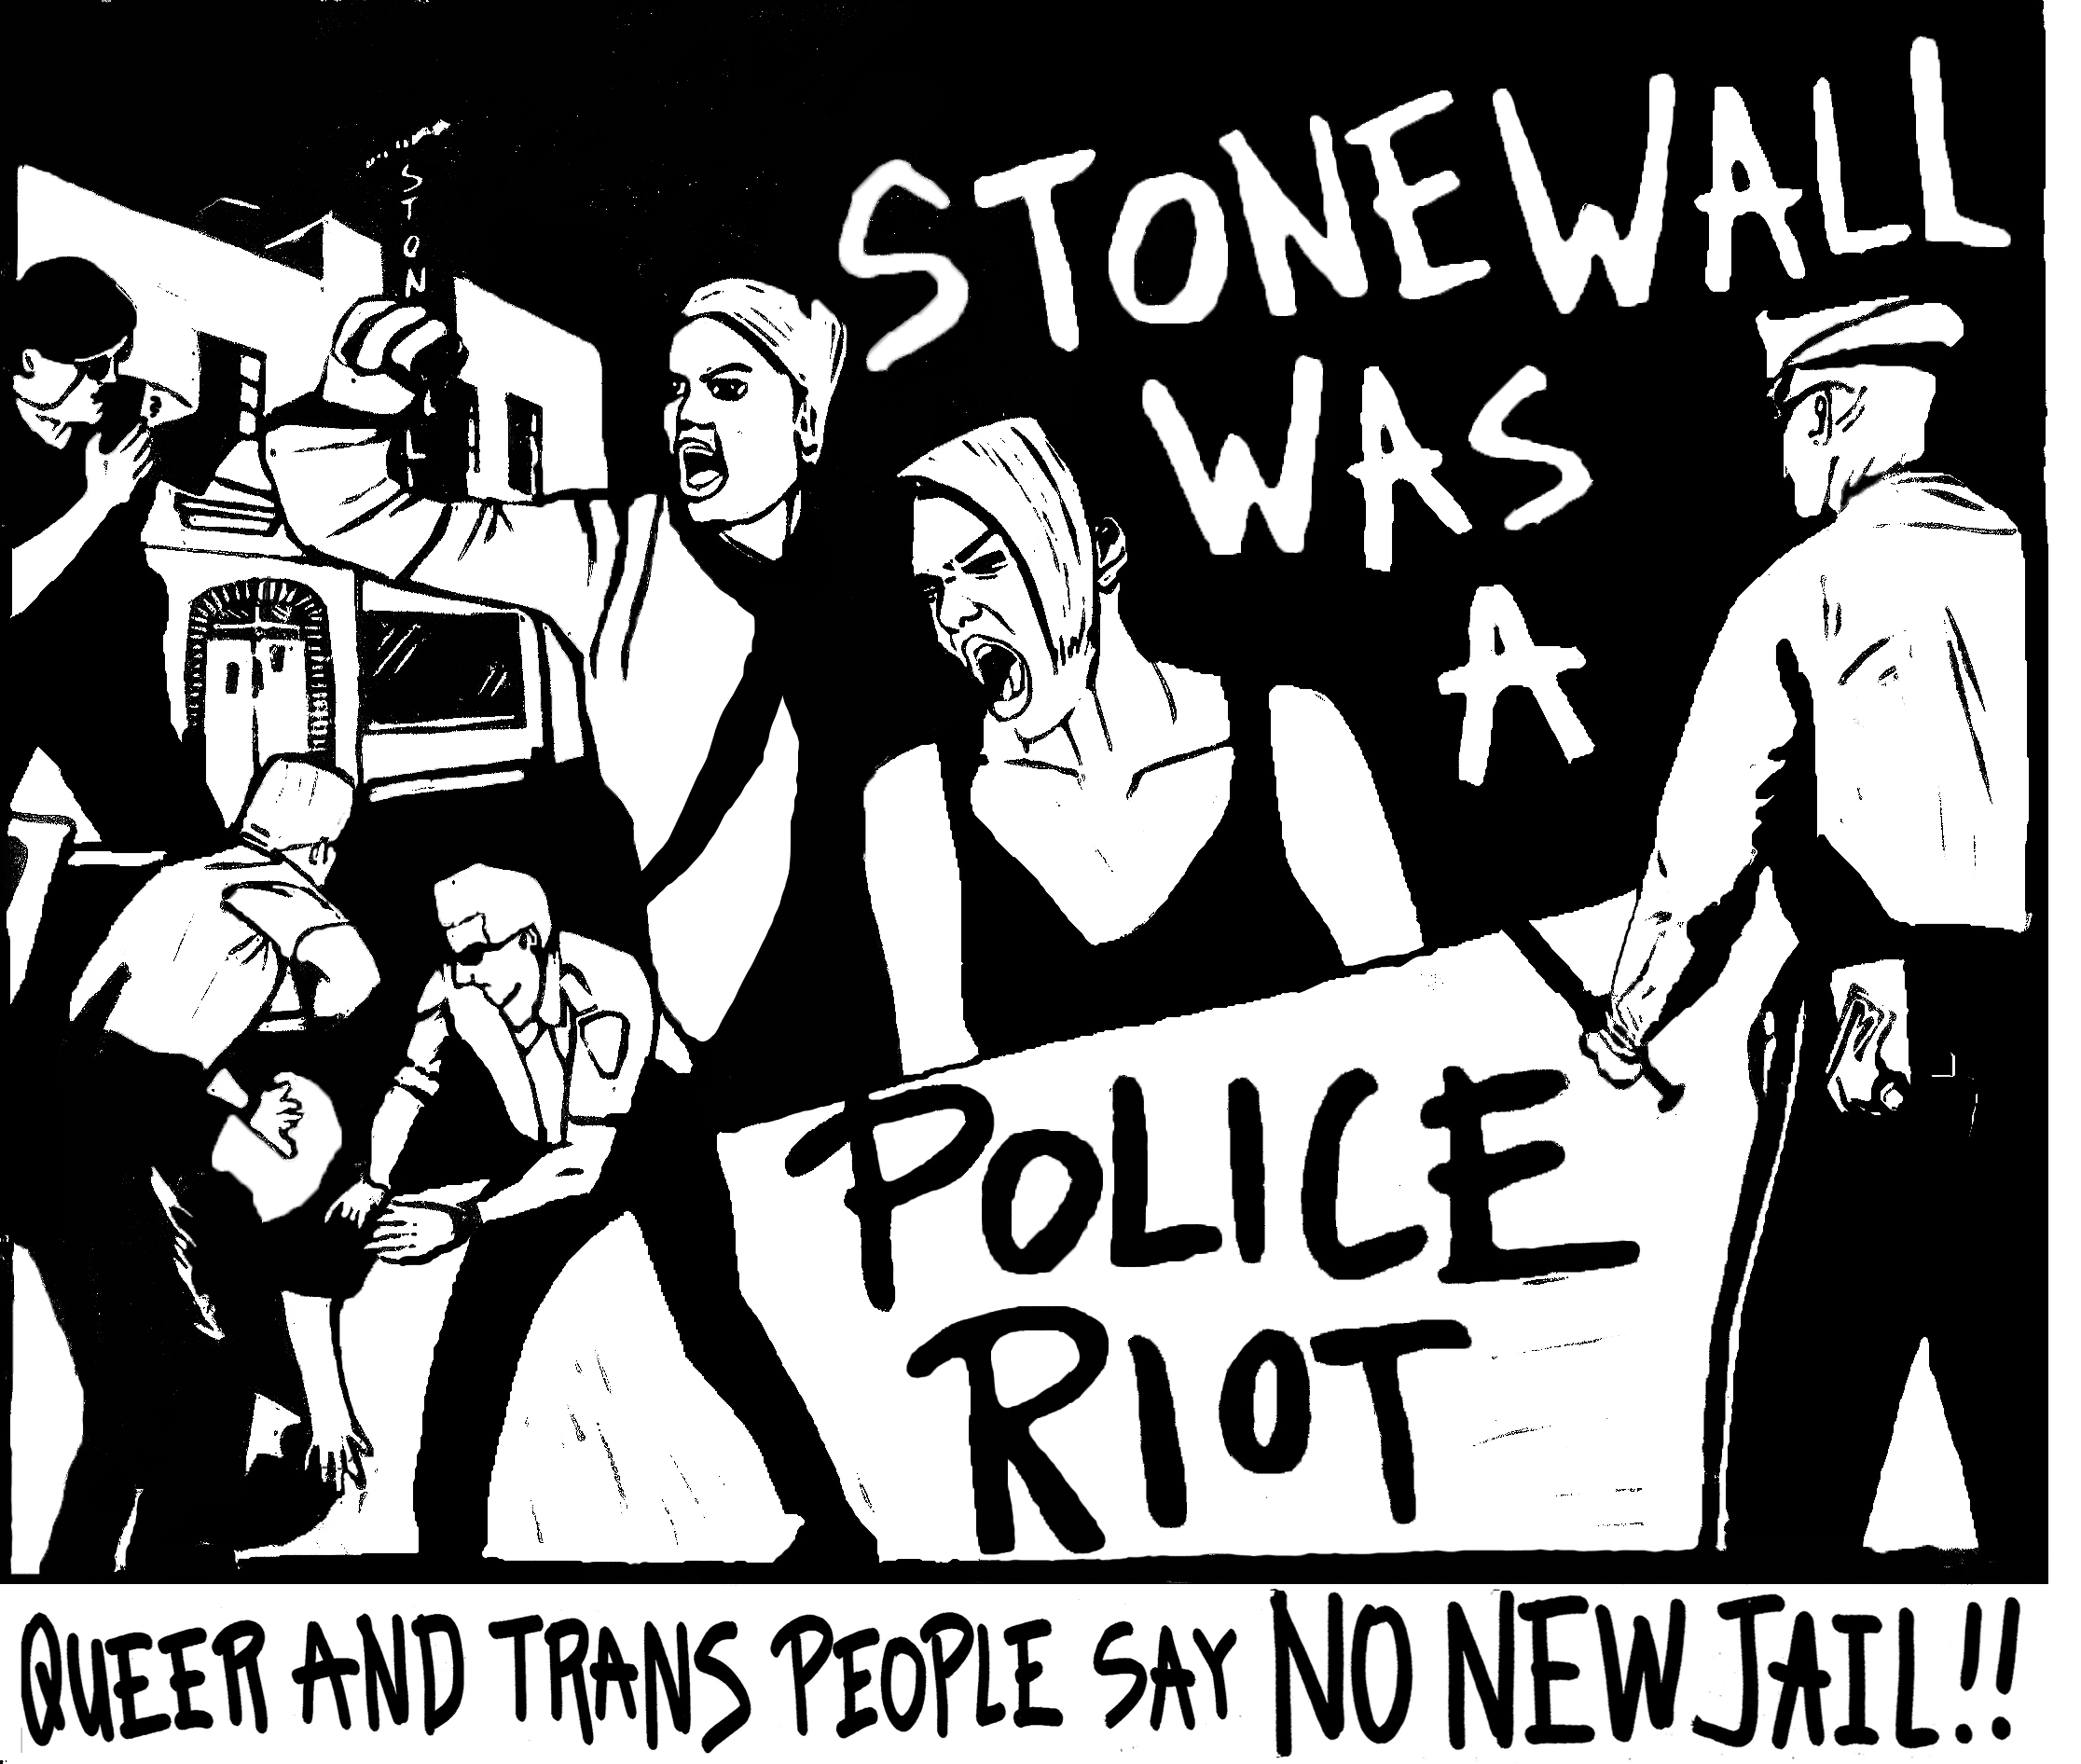 An illustration about the Stonewall riots.